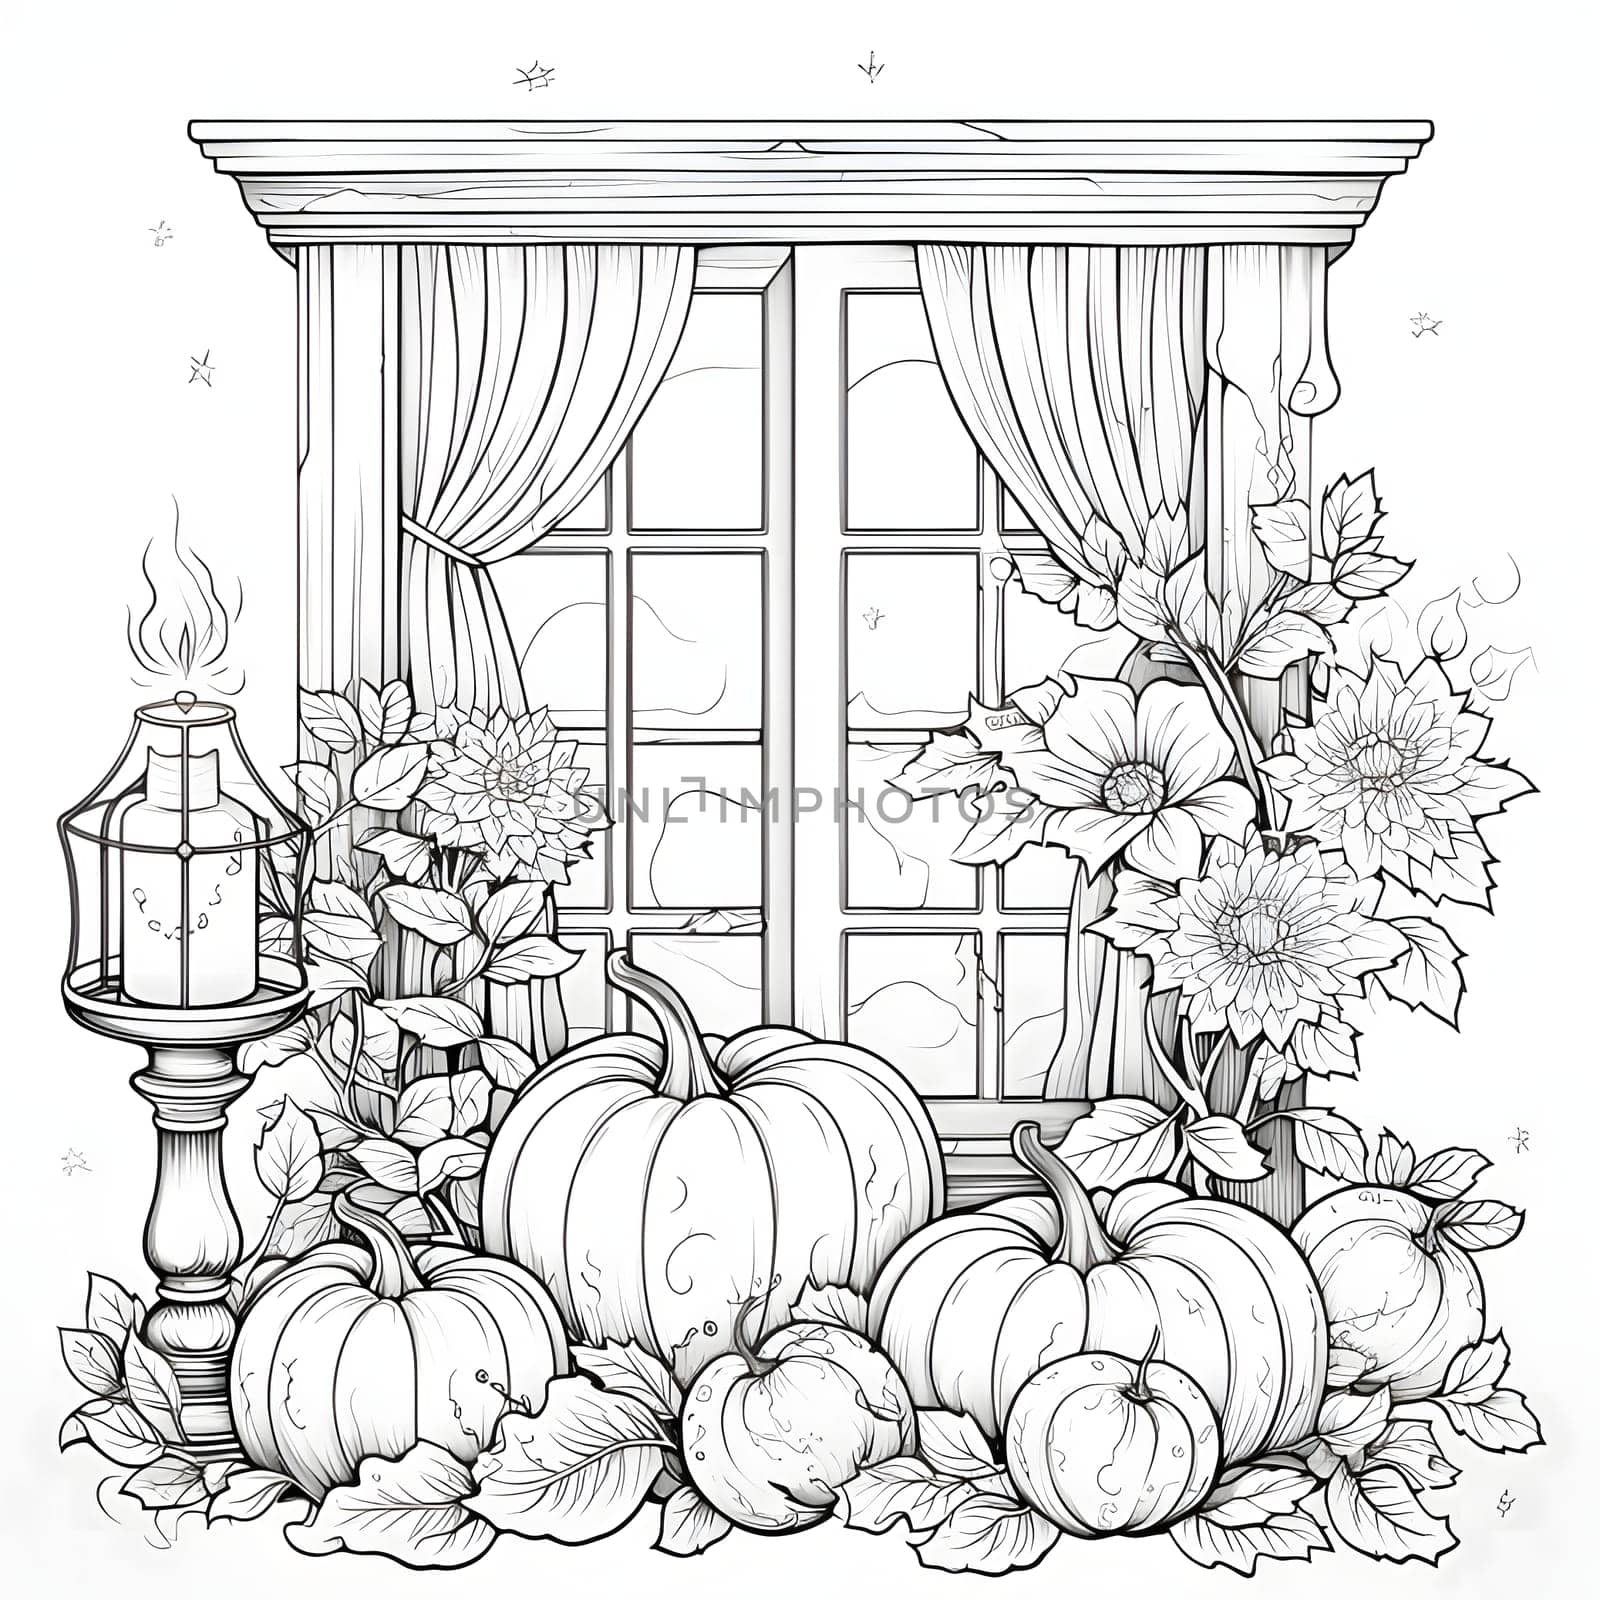 Black and White coloring book on it candles pumpkins flowers in the background window. Pumpkin as a dish of thanksgiving for the harvest, picture on a white isolated background. An atmosphere of joy and celebration.